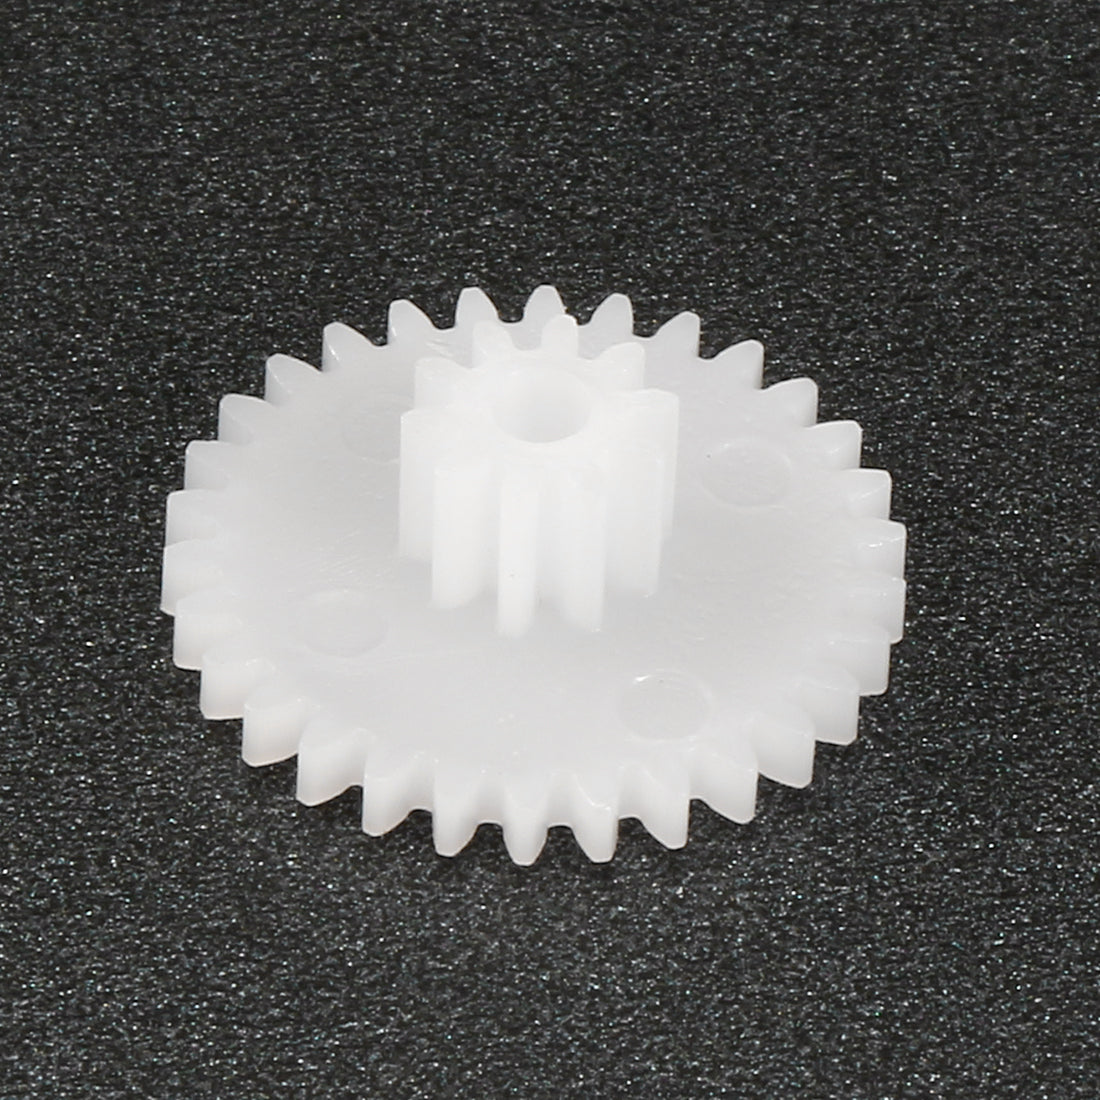 uxcell Uxcell 20Pcs 26102B Plastic Gear Accessories with 26 Teeth for DIY Car Robot Motor